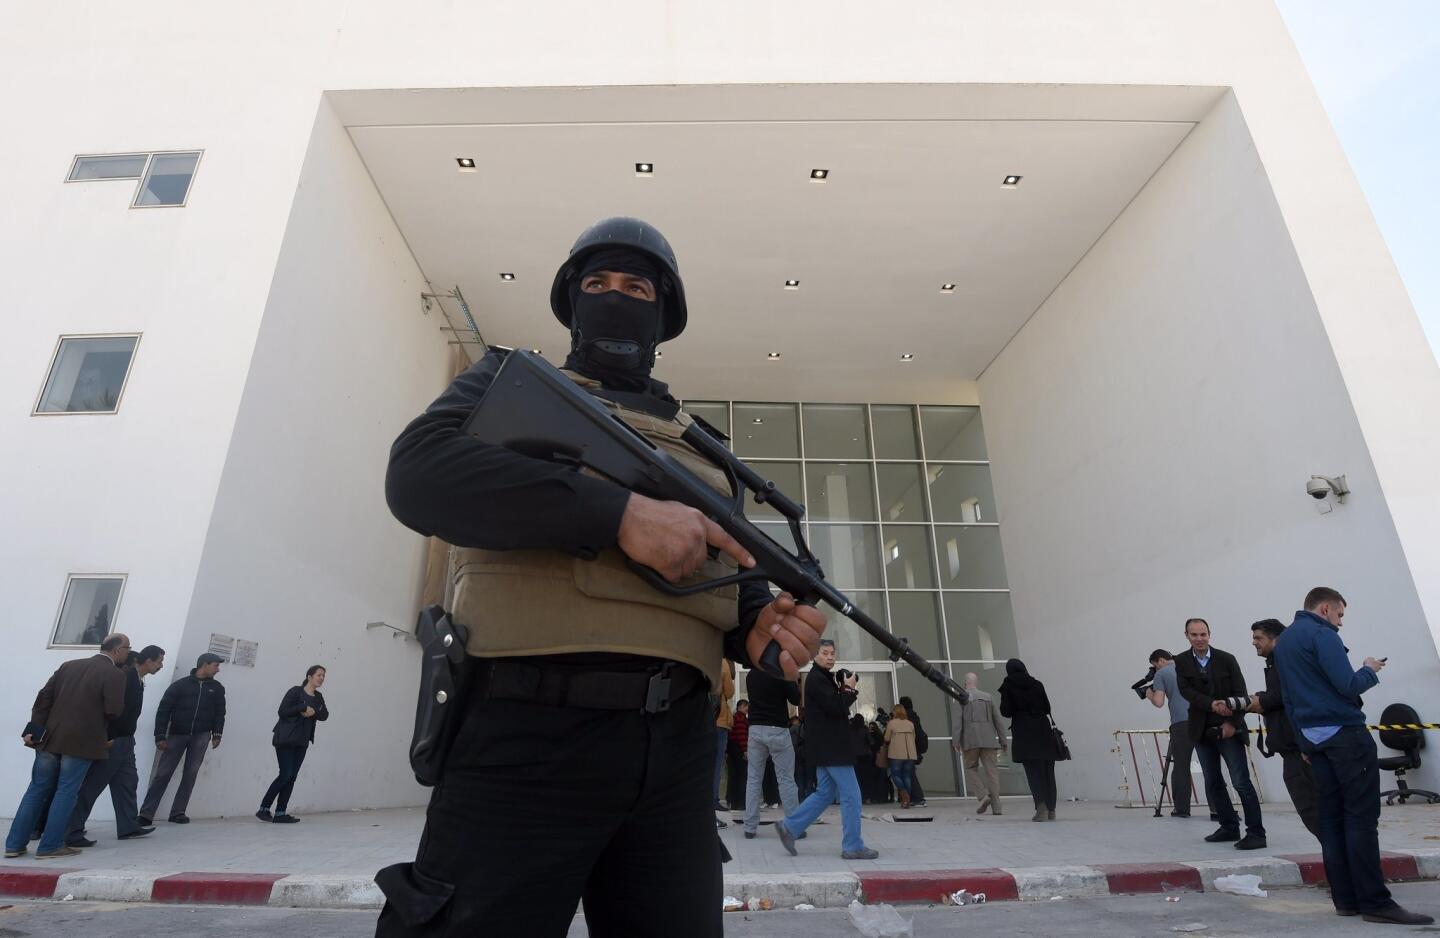 A member of the Tunisian security forces stands guard as journalists gather at the National Bardo Museum in Tunis on March 19, in the aftermath of an attack on foreign tourists.